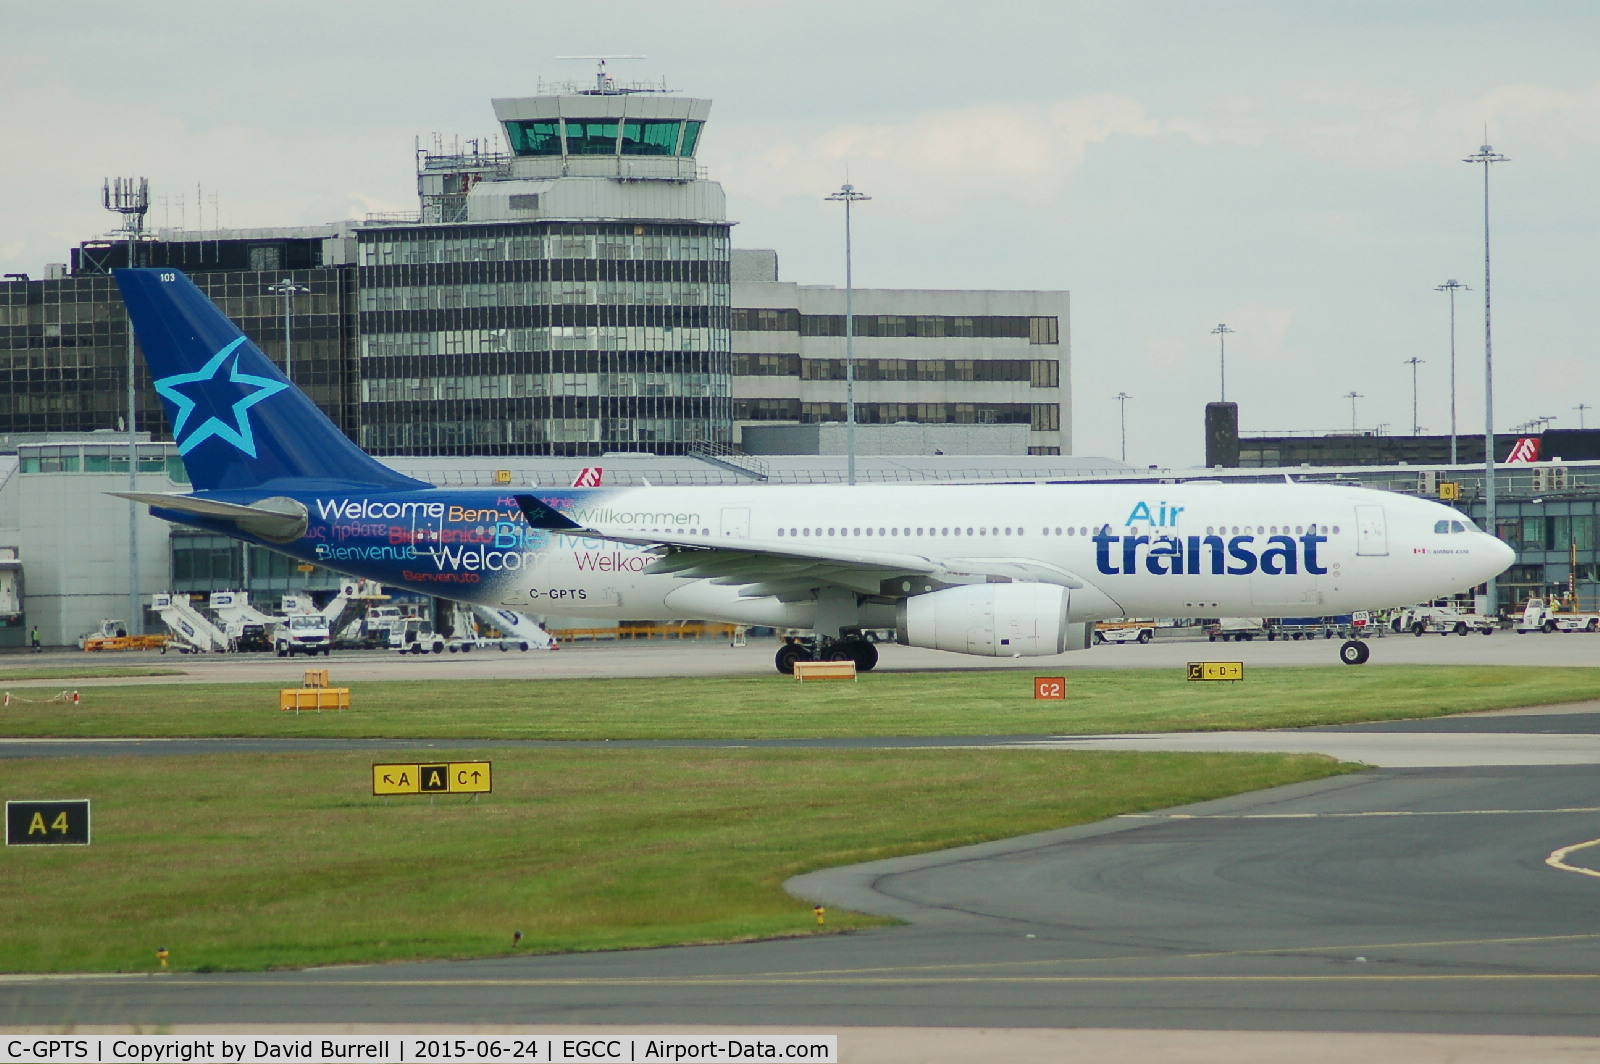 C-GPTS, 2002 Airbus A330-243 C/N 480, Air Transat Airbus A330-243 Taxiing at Manchester Airport.